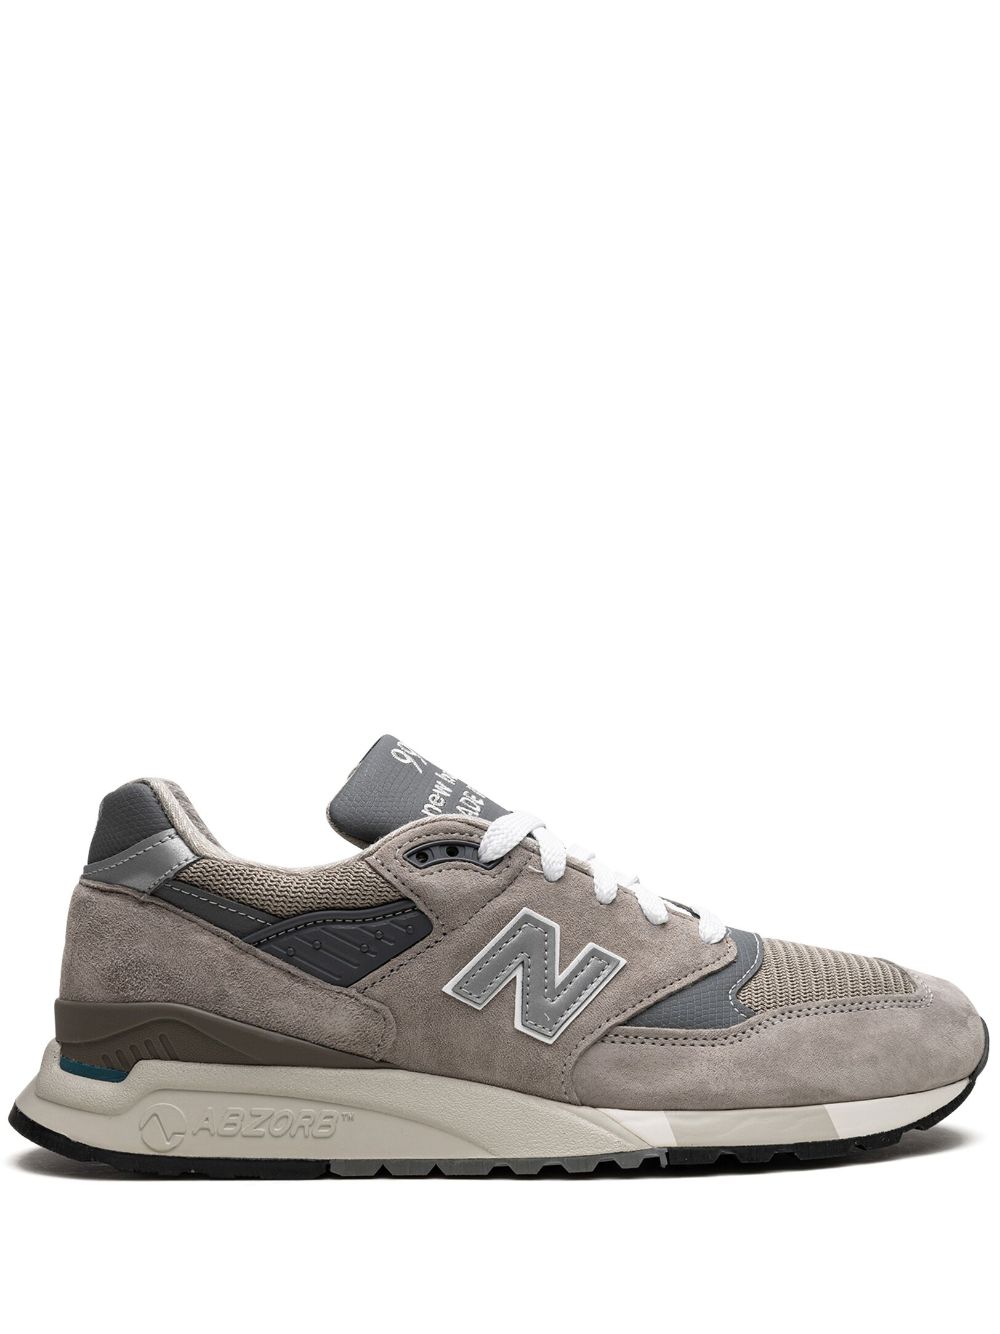 New Balance 998 Made In Usa "Grey/Silver" sneakers - Neutrals